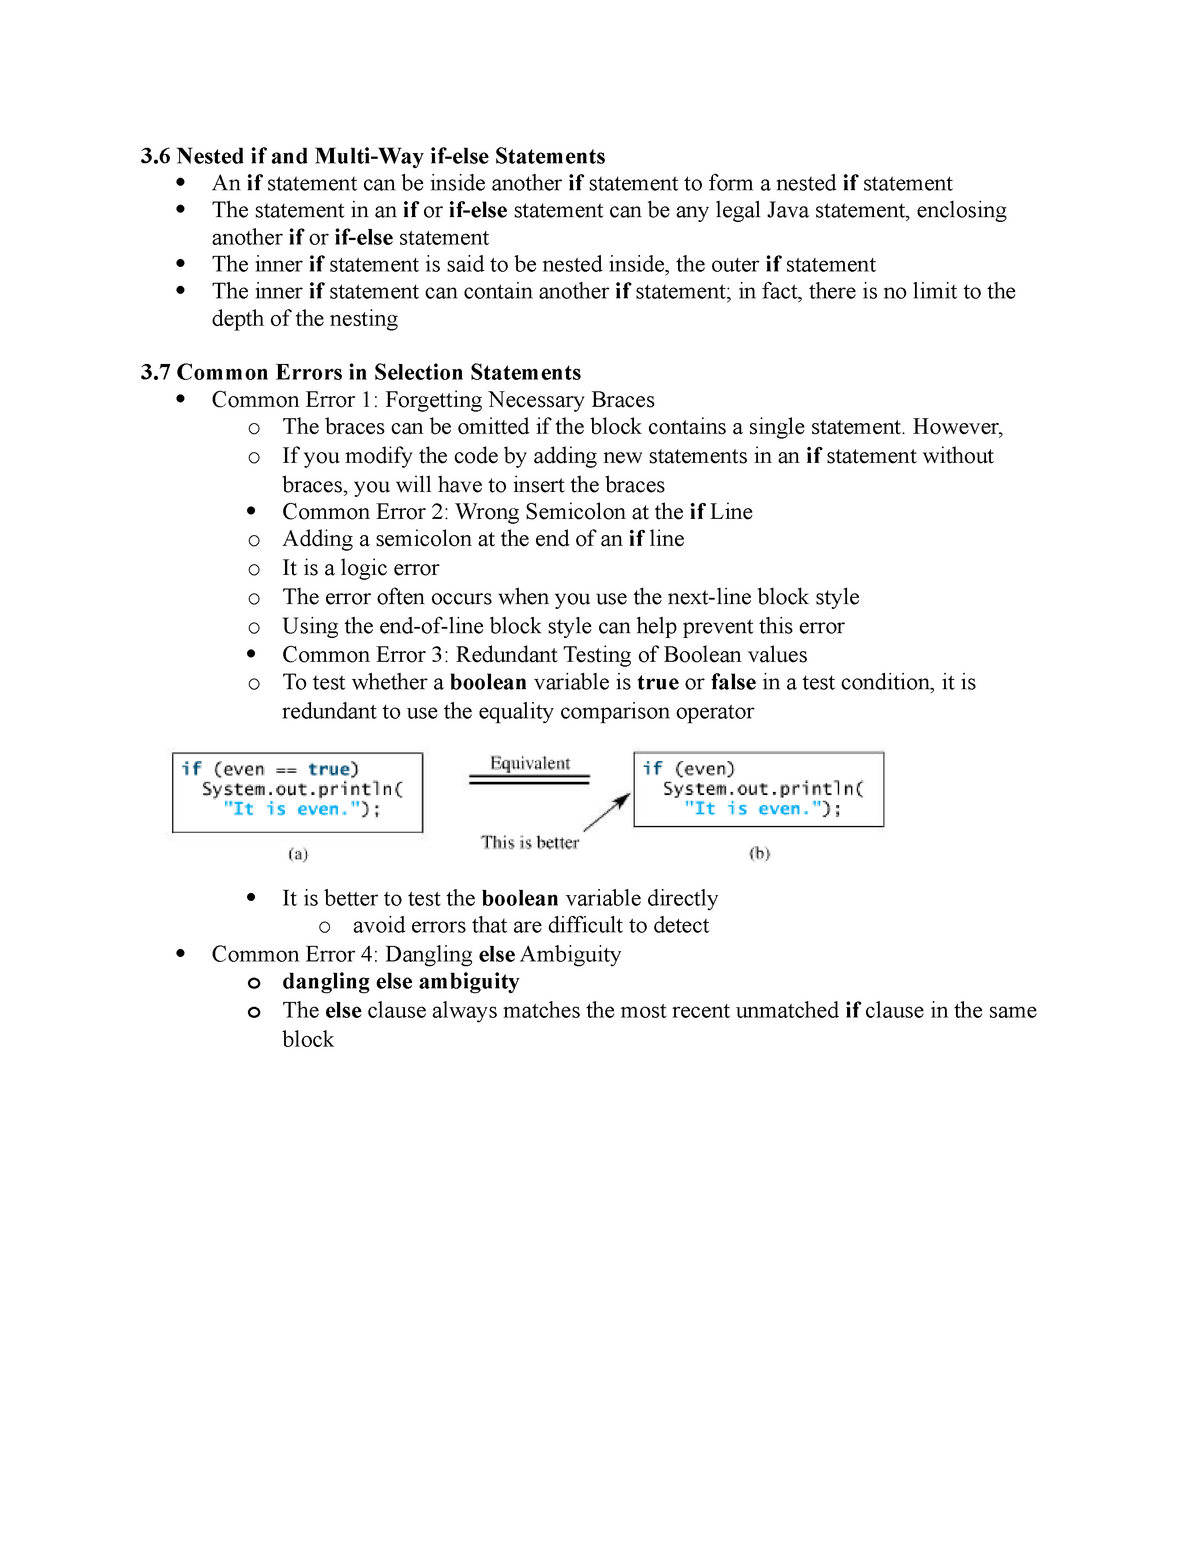 Java 3.6 and 3 - Chapter 3 notes - 3 Nested if and Multi-Way if-else ...